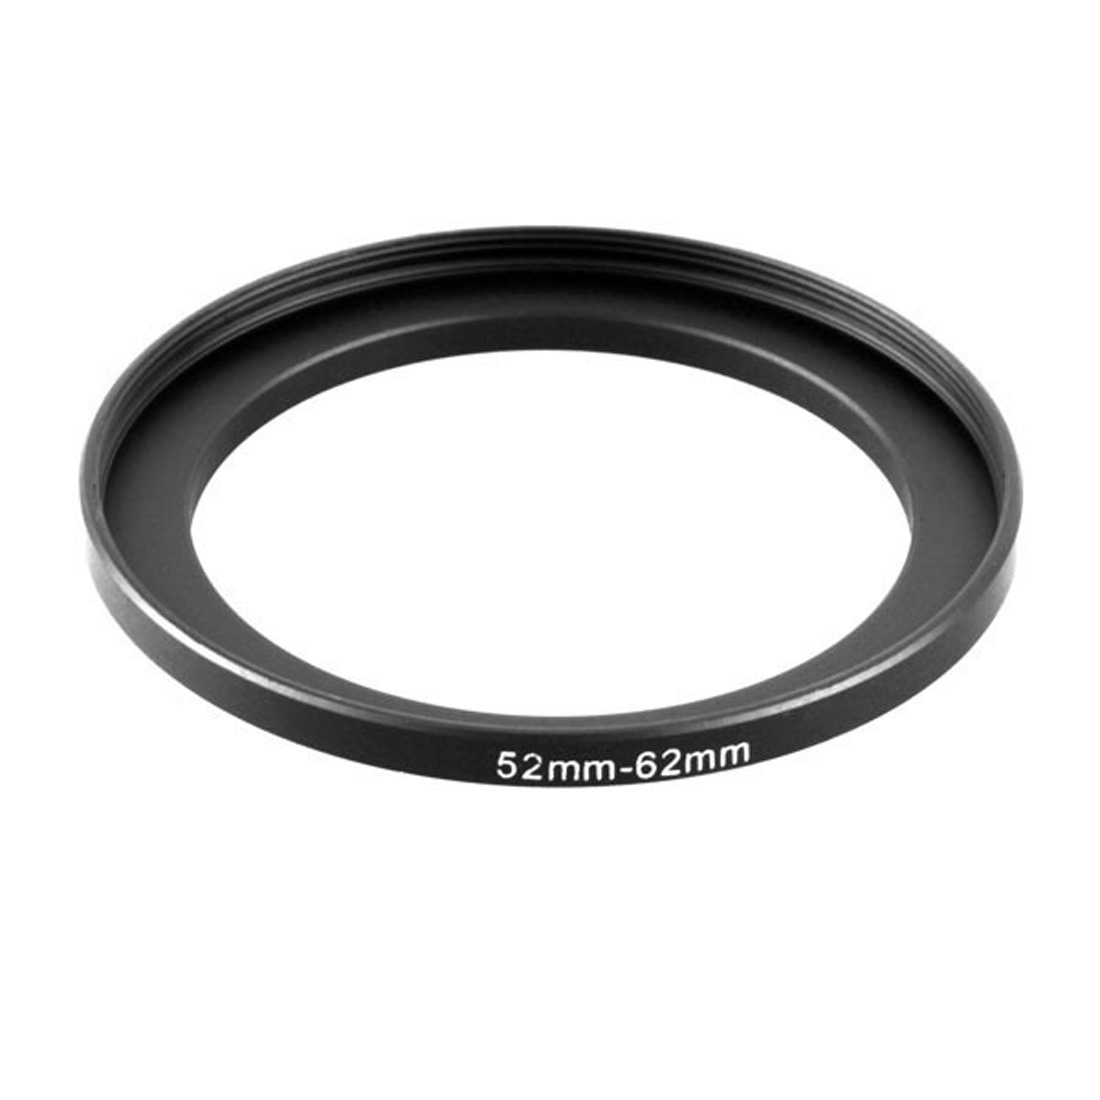 Step-up ring 52-62 mm